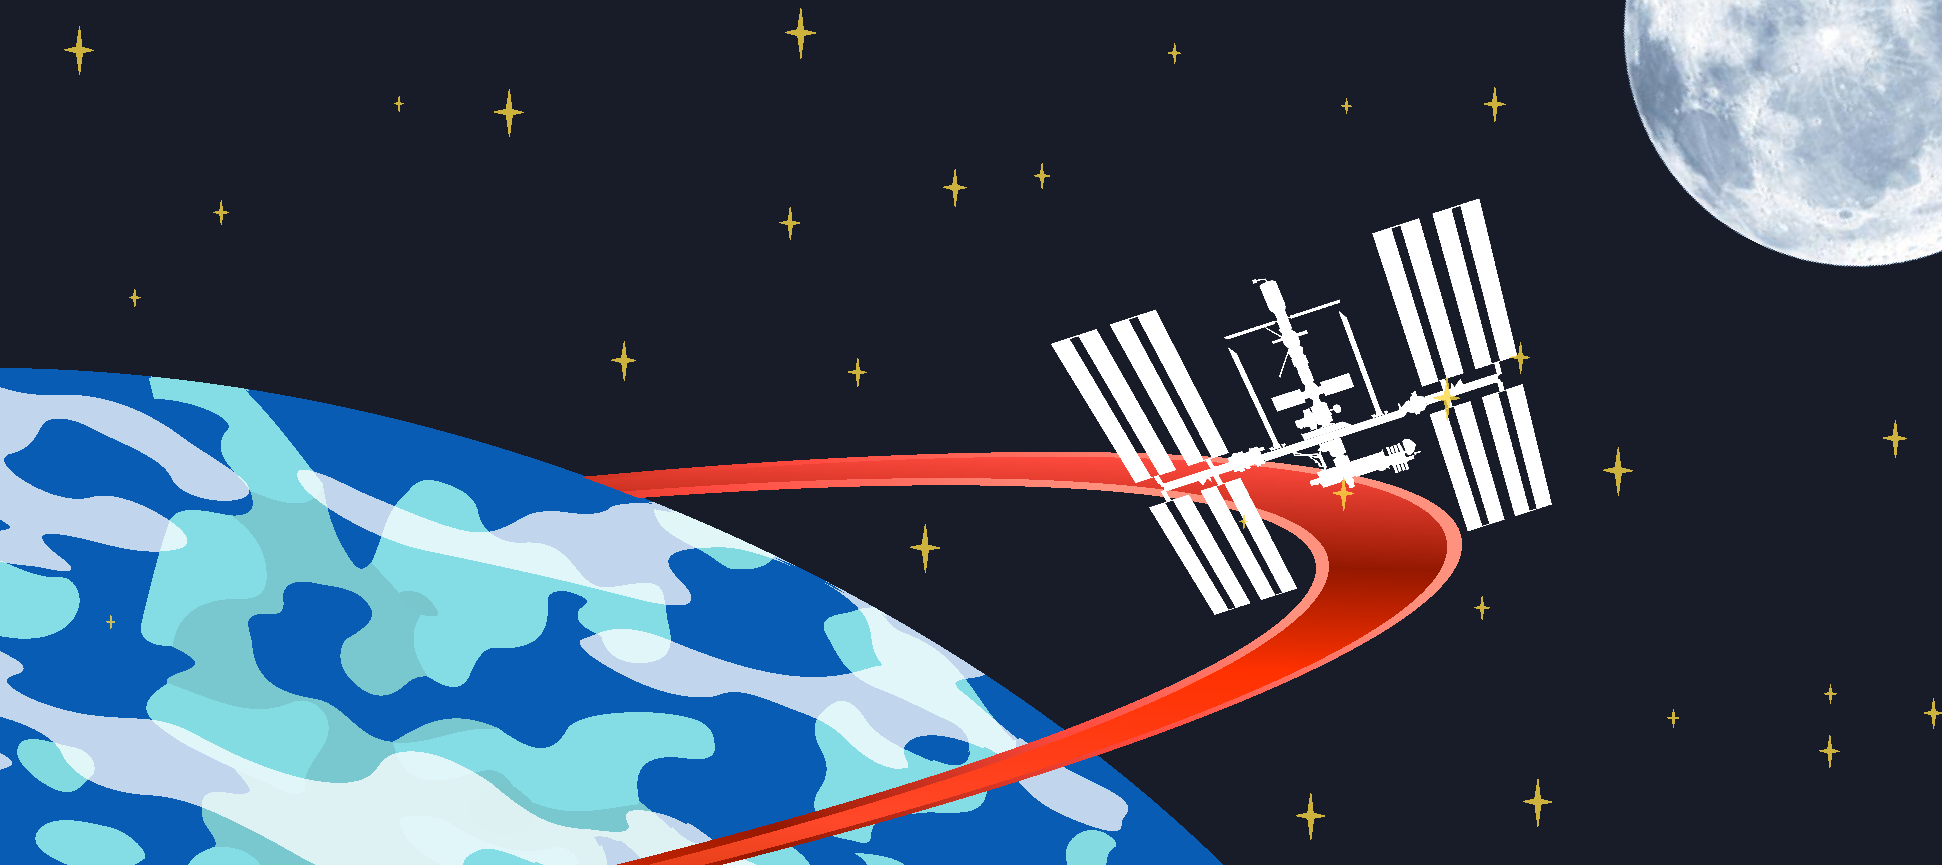 An illustrated render of Earth, the Moon, and the International Space Station is displayed with text reading "Extended Stays in Space" above Earth and the space station. Earth is to the bottom left of the image, with a red line and the space station going around it, to display a trajectory path. Earth's Moon is in the top right corner of the image, with space and stars in the background.